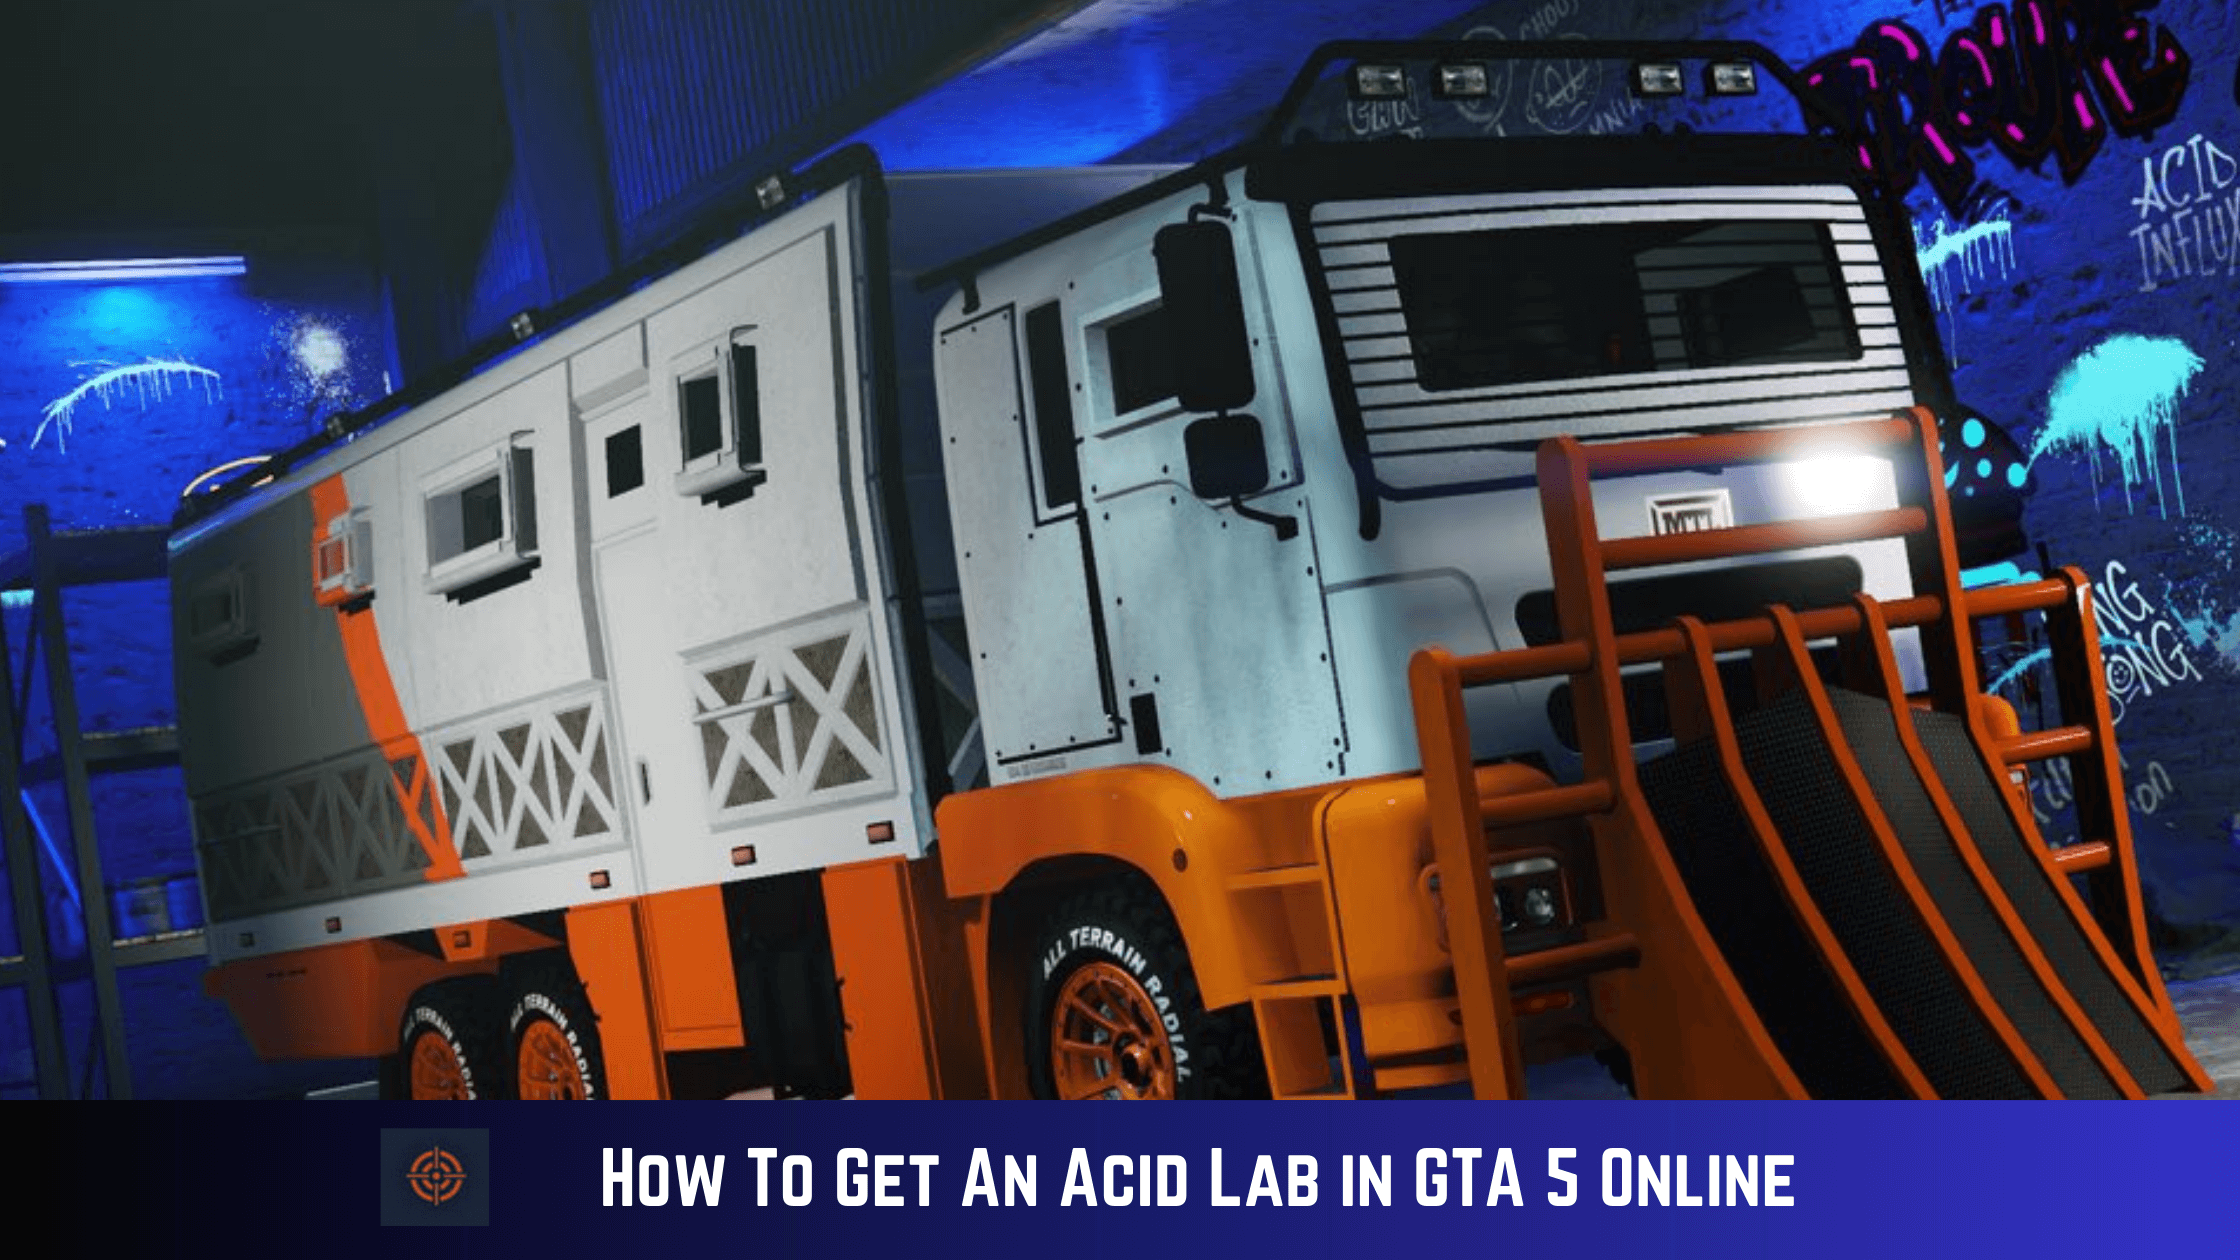 How To Get An Acid Lab in GTA 5 Online